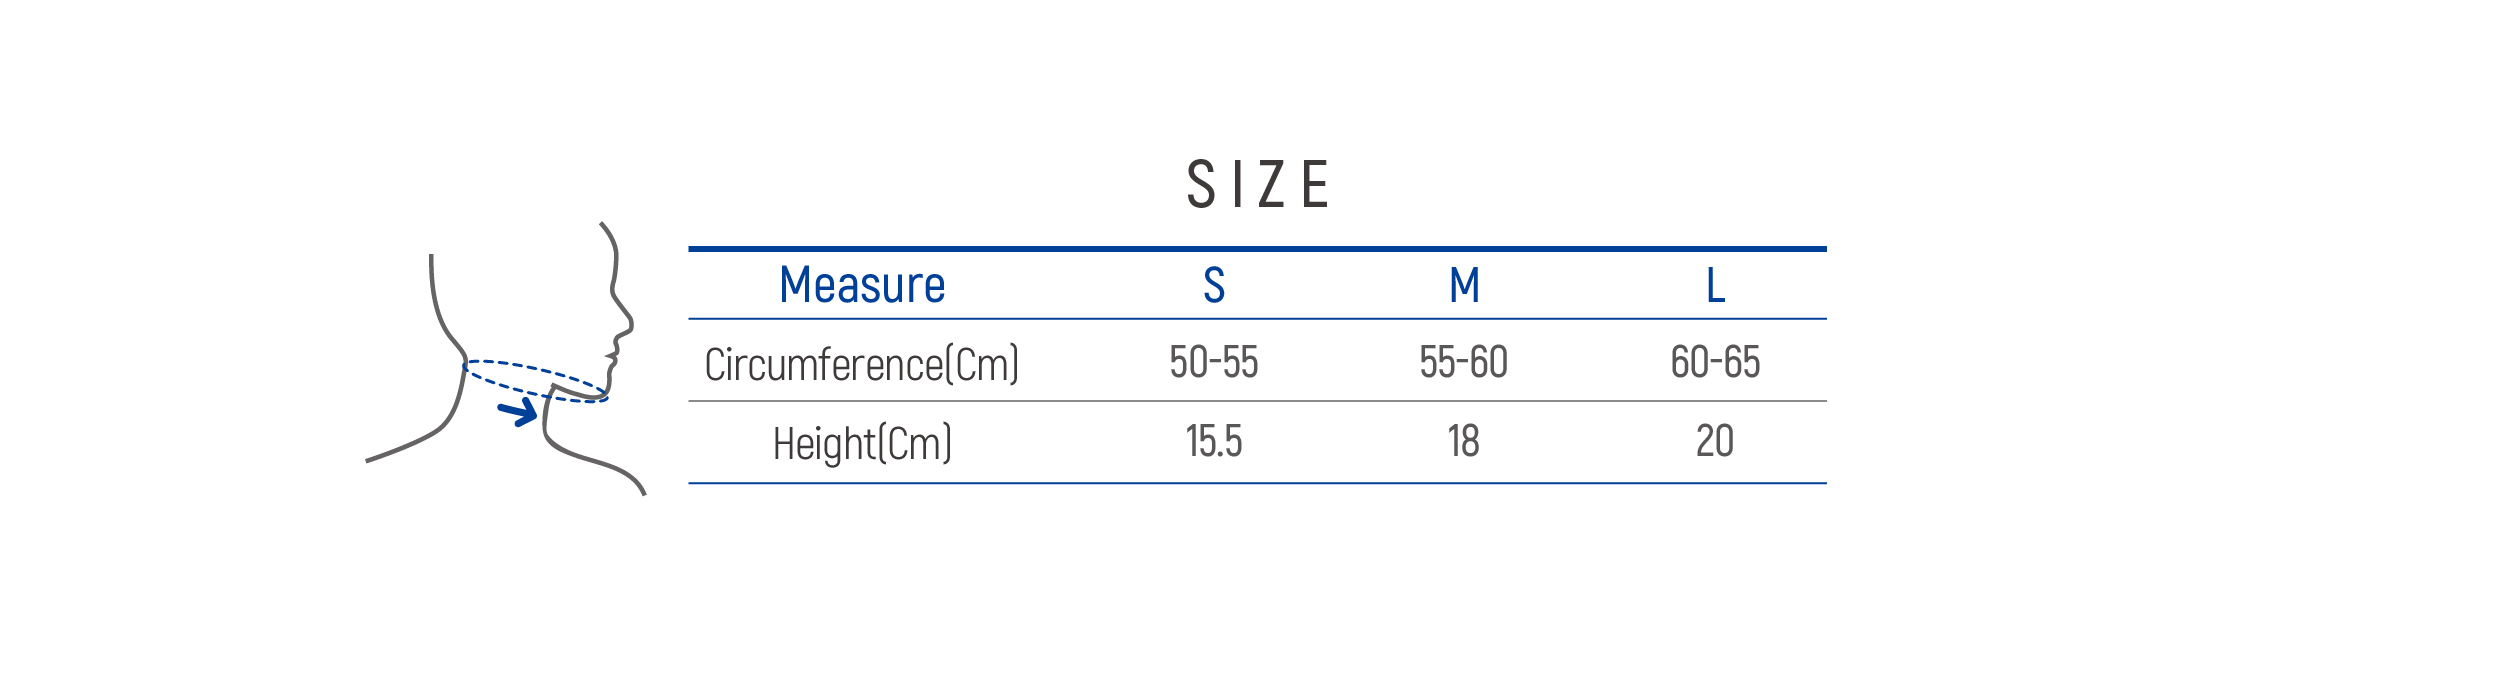 DR-123 Size table image